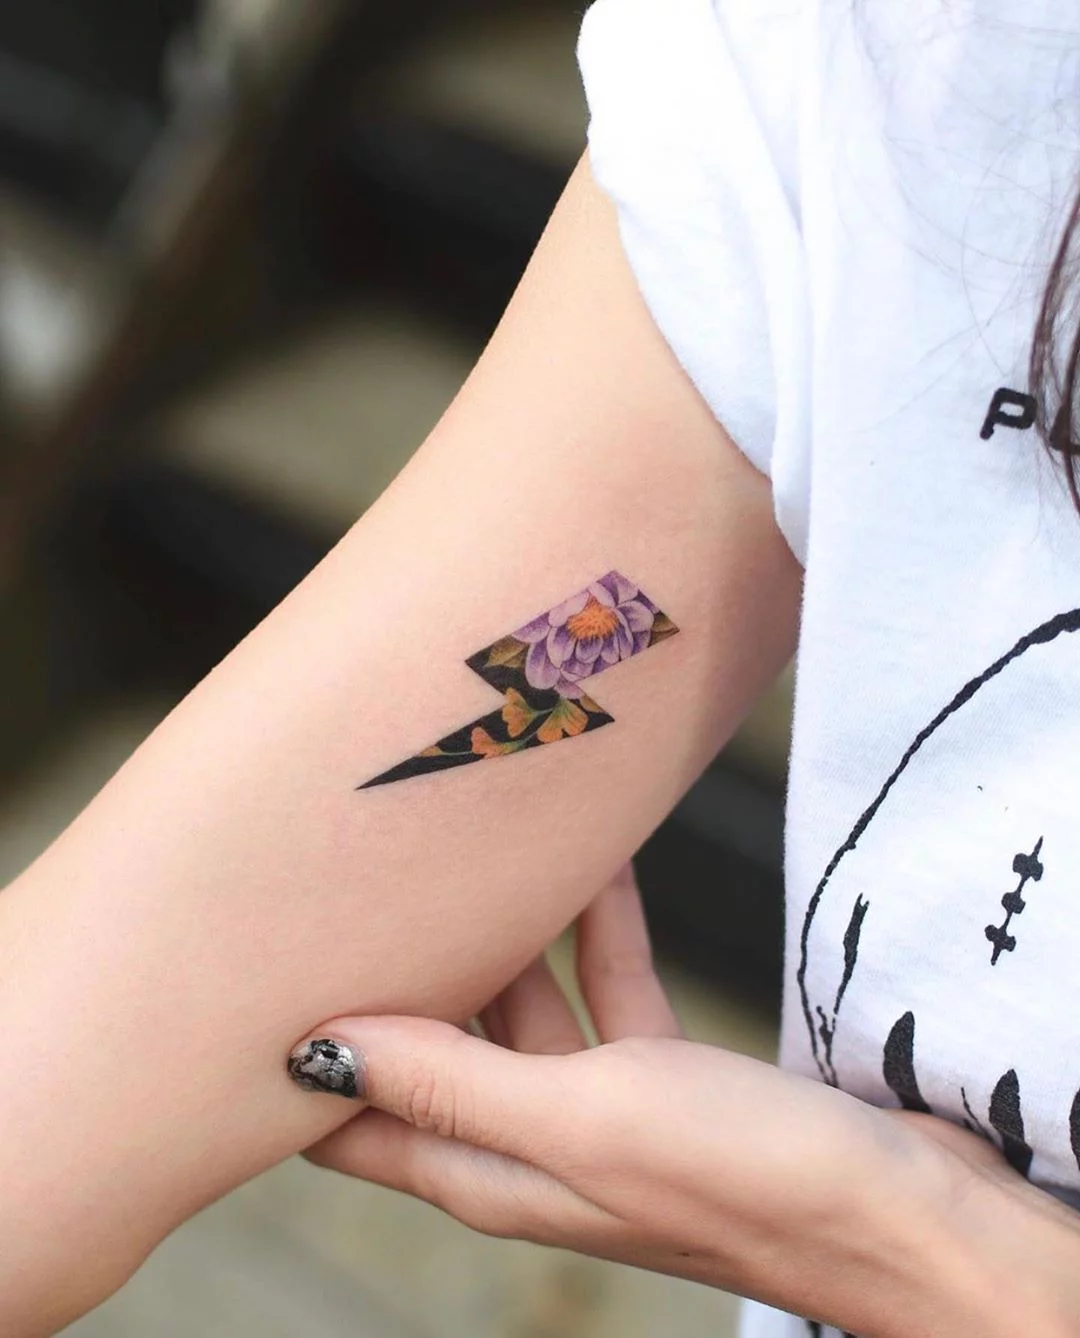 What are the Current Trending Tattoo Styles, and What Do They Signify?